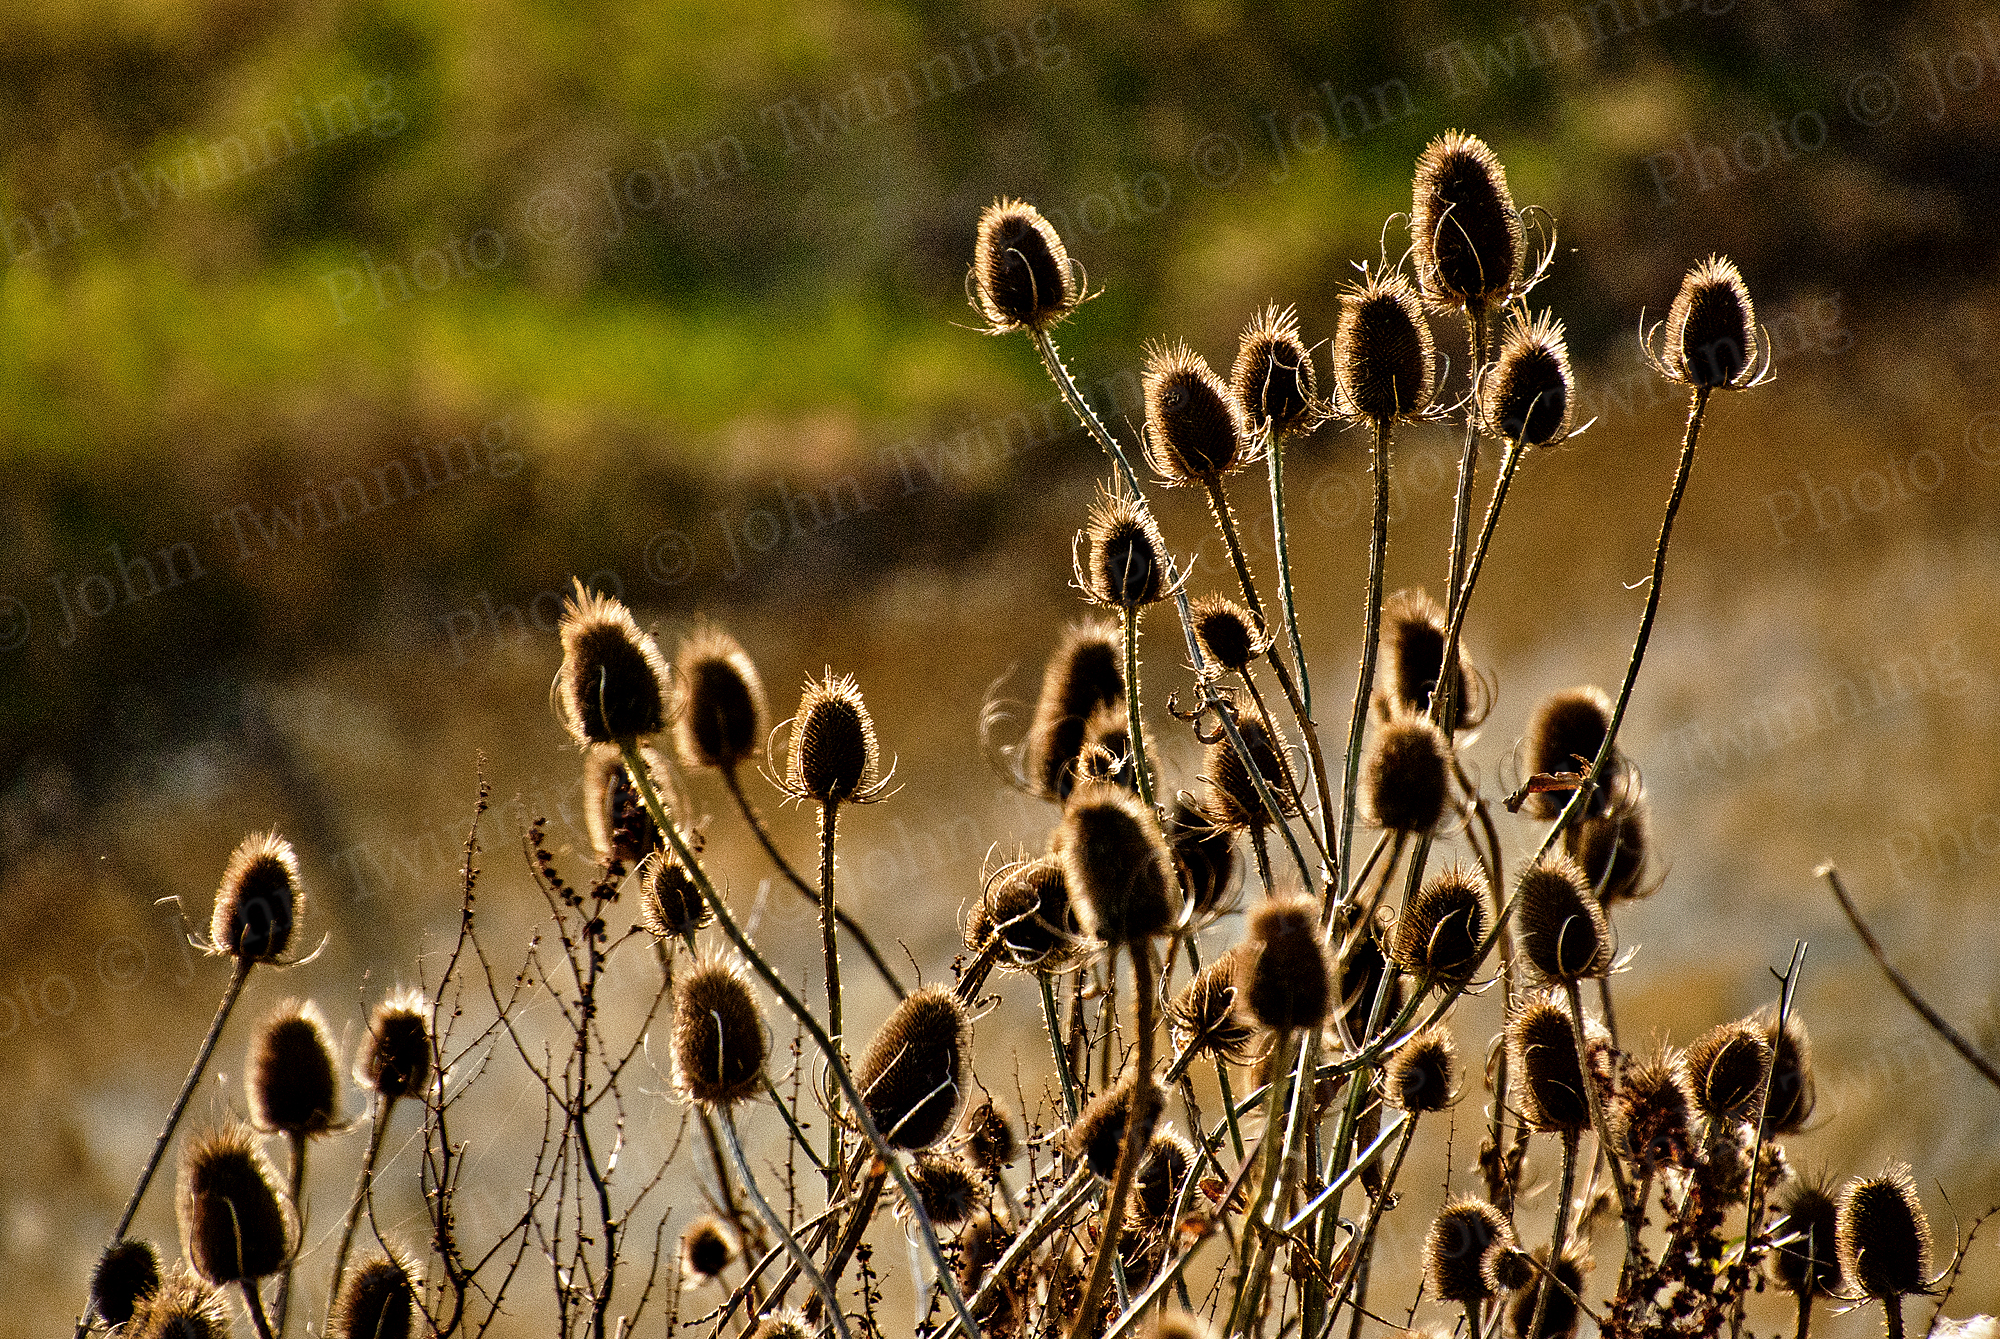 Private: ‘Stop Your Teasel-ing’ [photo] – art print from a warm photograph of teasels back-lit with bright sunlight